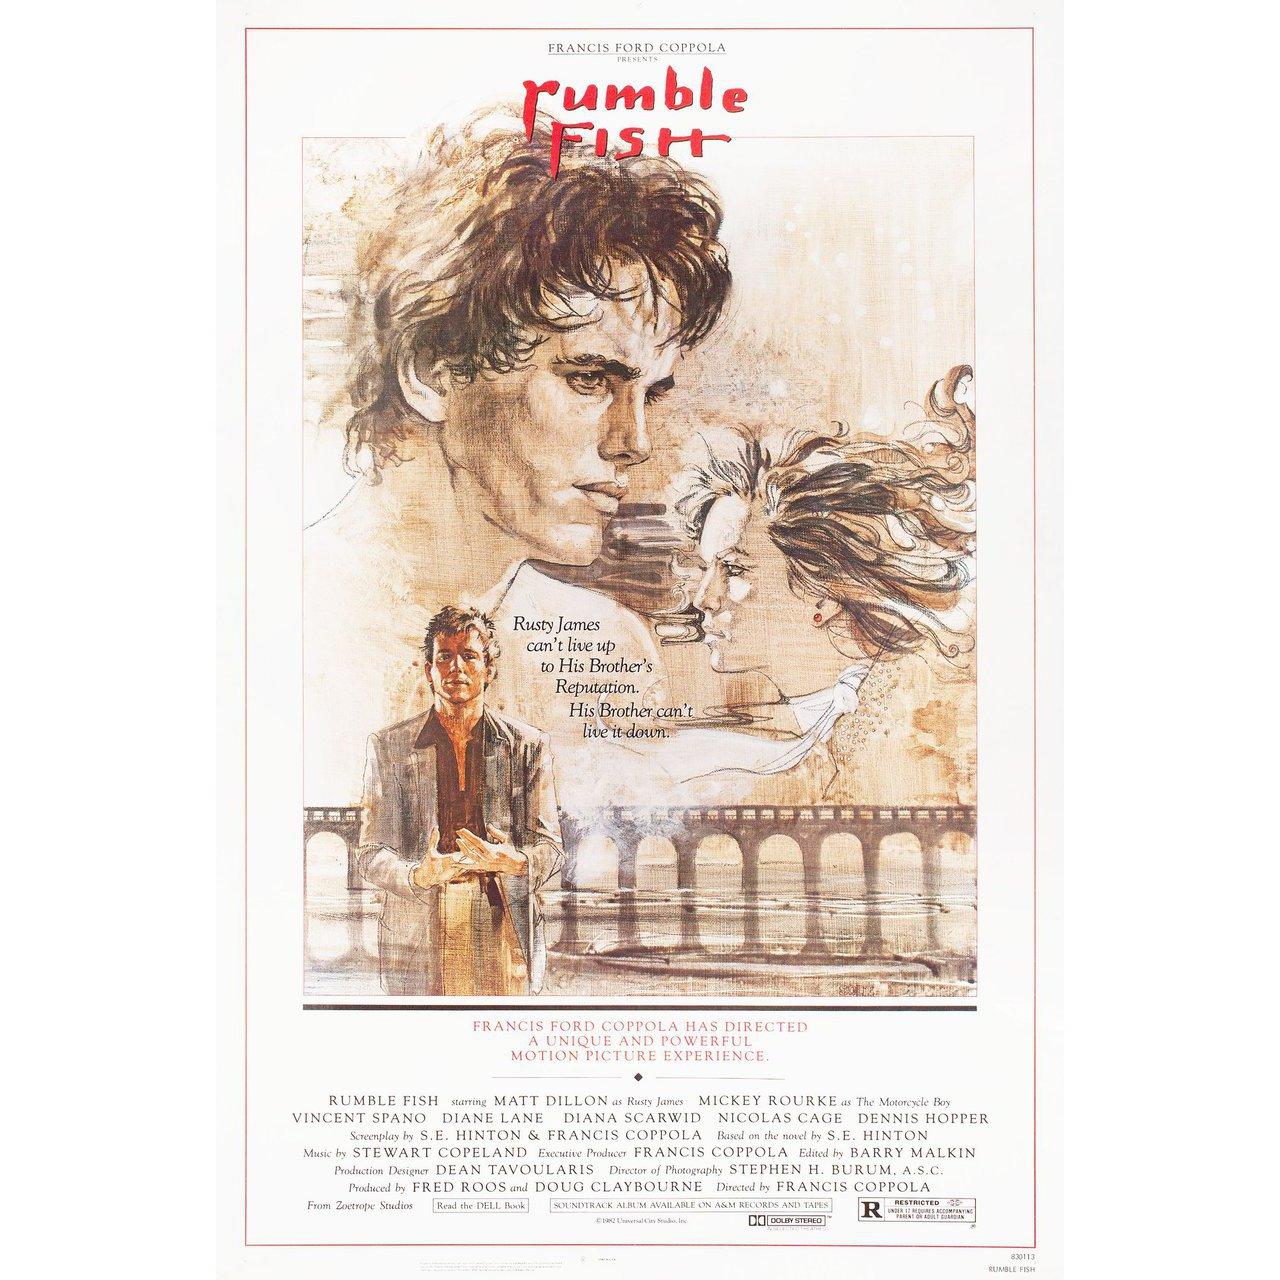 Original 1983 U.S. one sheet poster by John Solie for the film Rumble Fish directed by Francis Ford Coppola with matte Dillon / Mickey Rourke / Diane Lane / Dennis Hopper. Very good-fine condition, rolled. Please note: The size is stated in inches